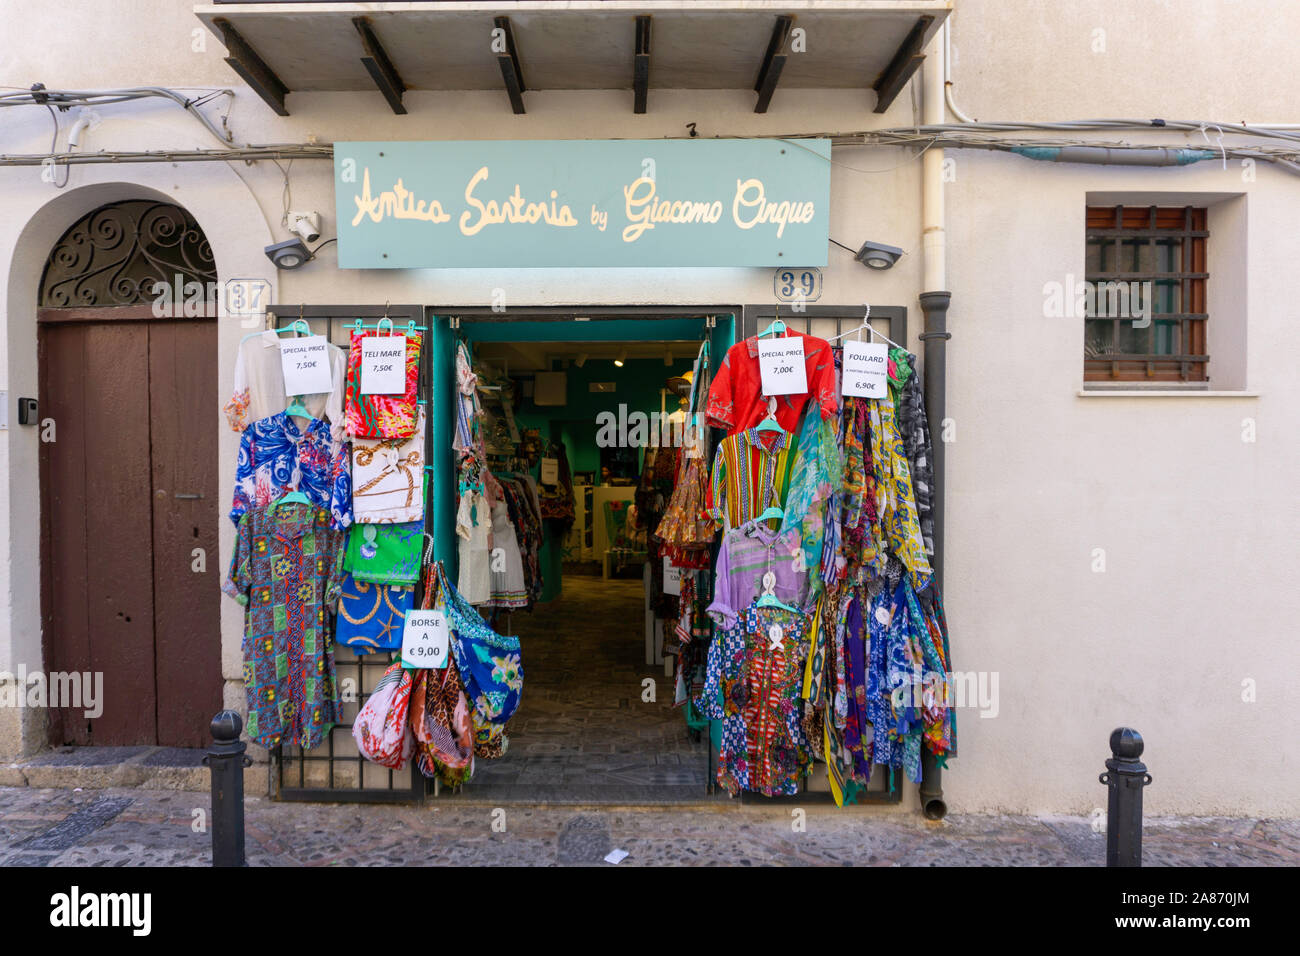 A branch shop of Antica Sartoria by Giacomo Cinque, a clothing store in  Cefalu, One of the many attractive stores among the side streets of Cefalú  Stock Photo - Alamy